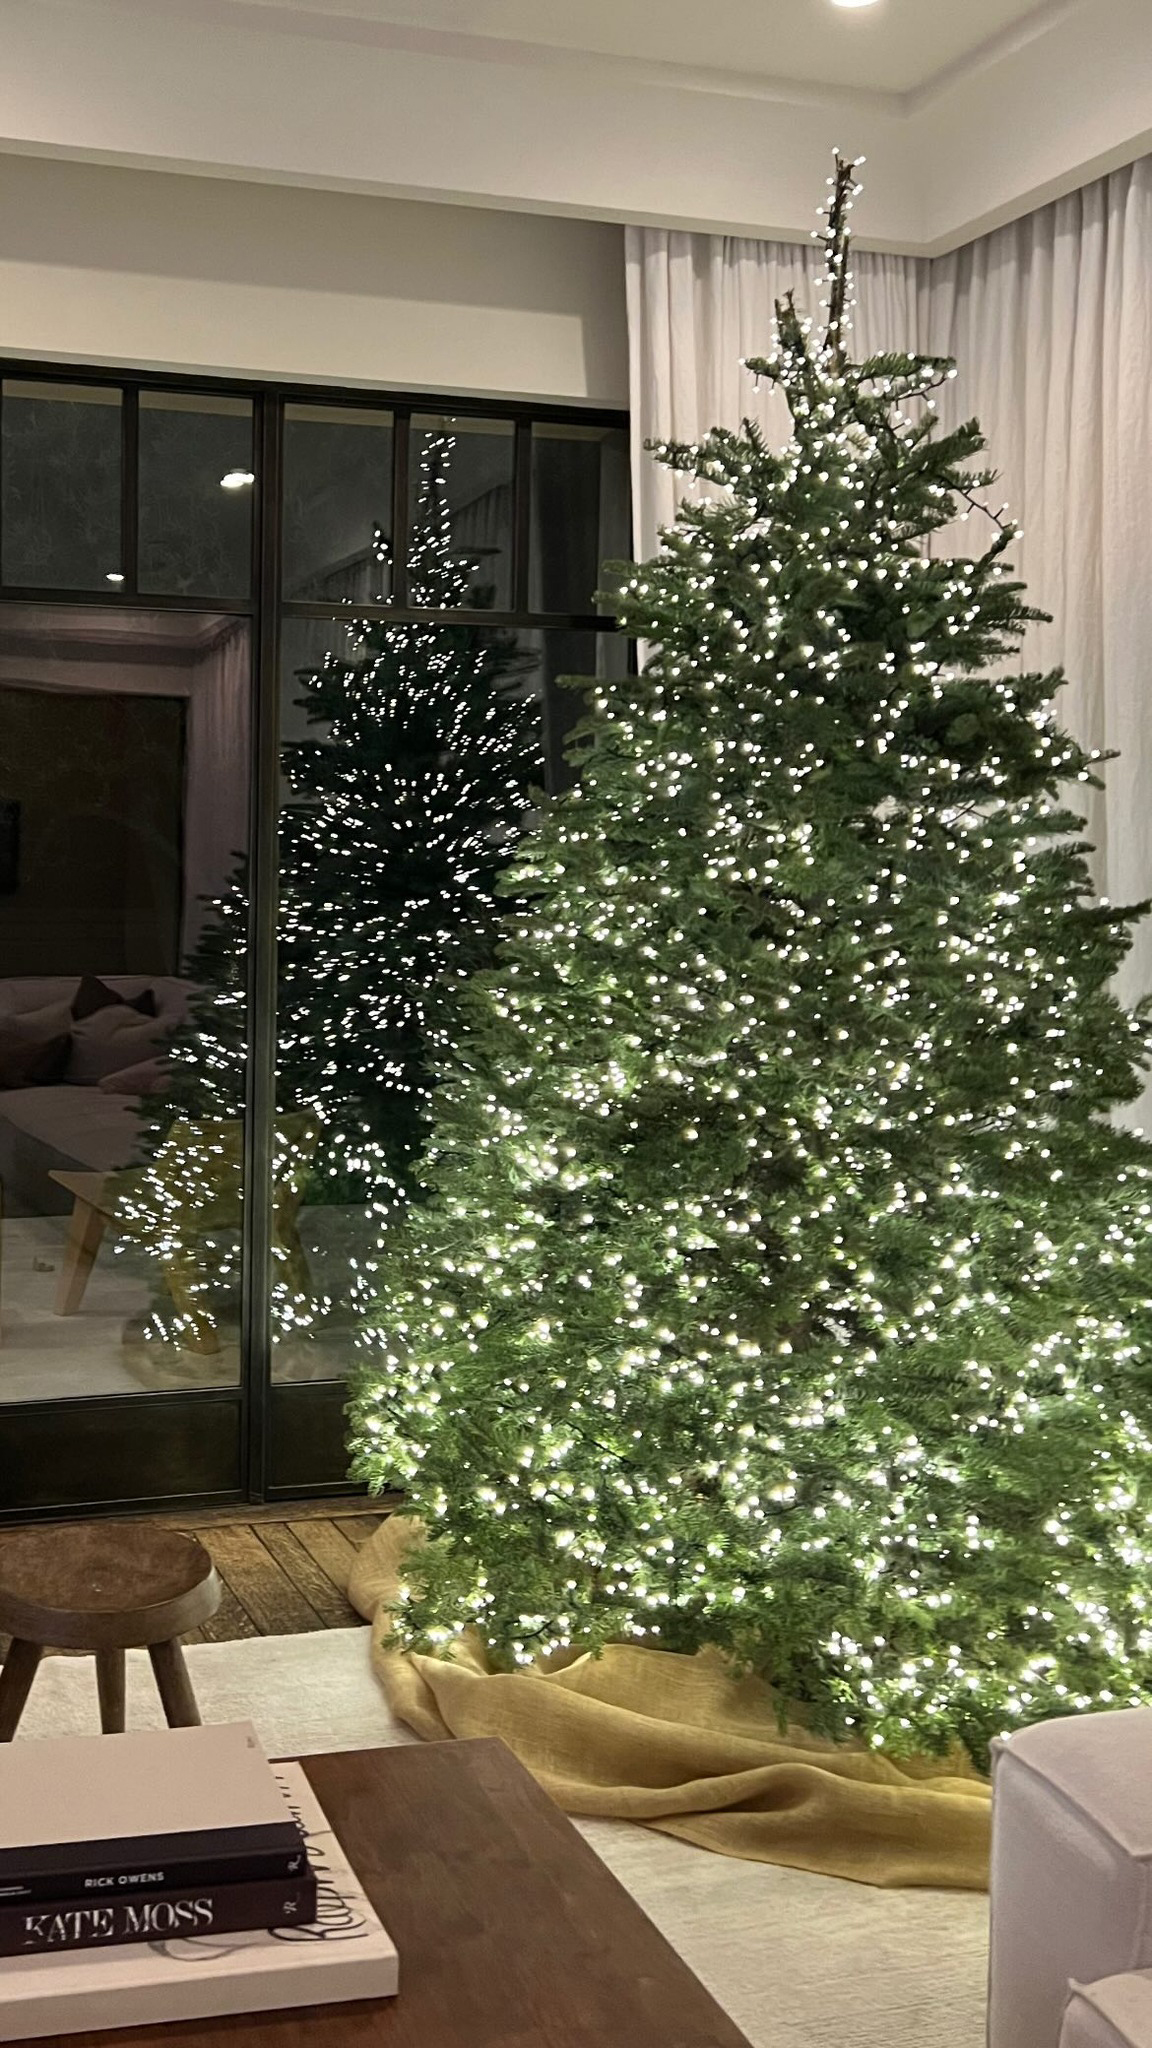 Kourtney recently showed off her modest Christmas tree decorated with white string lights